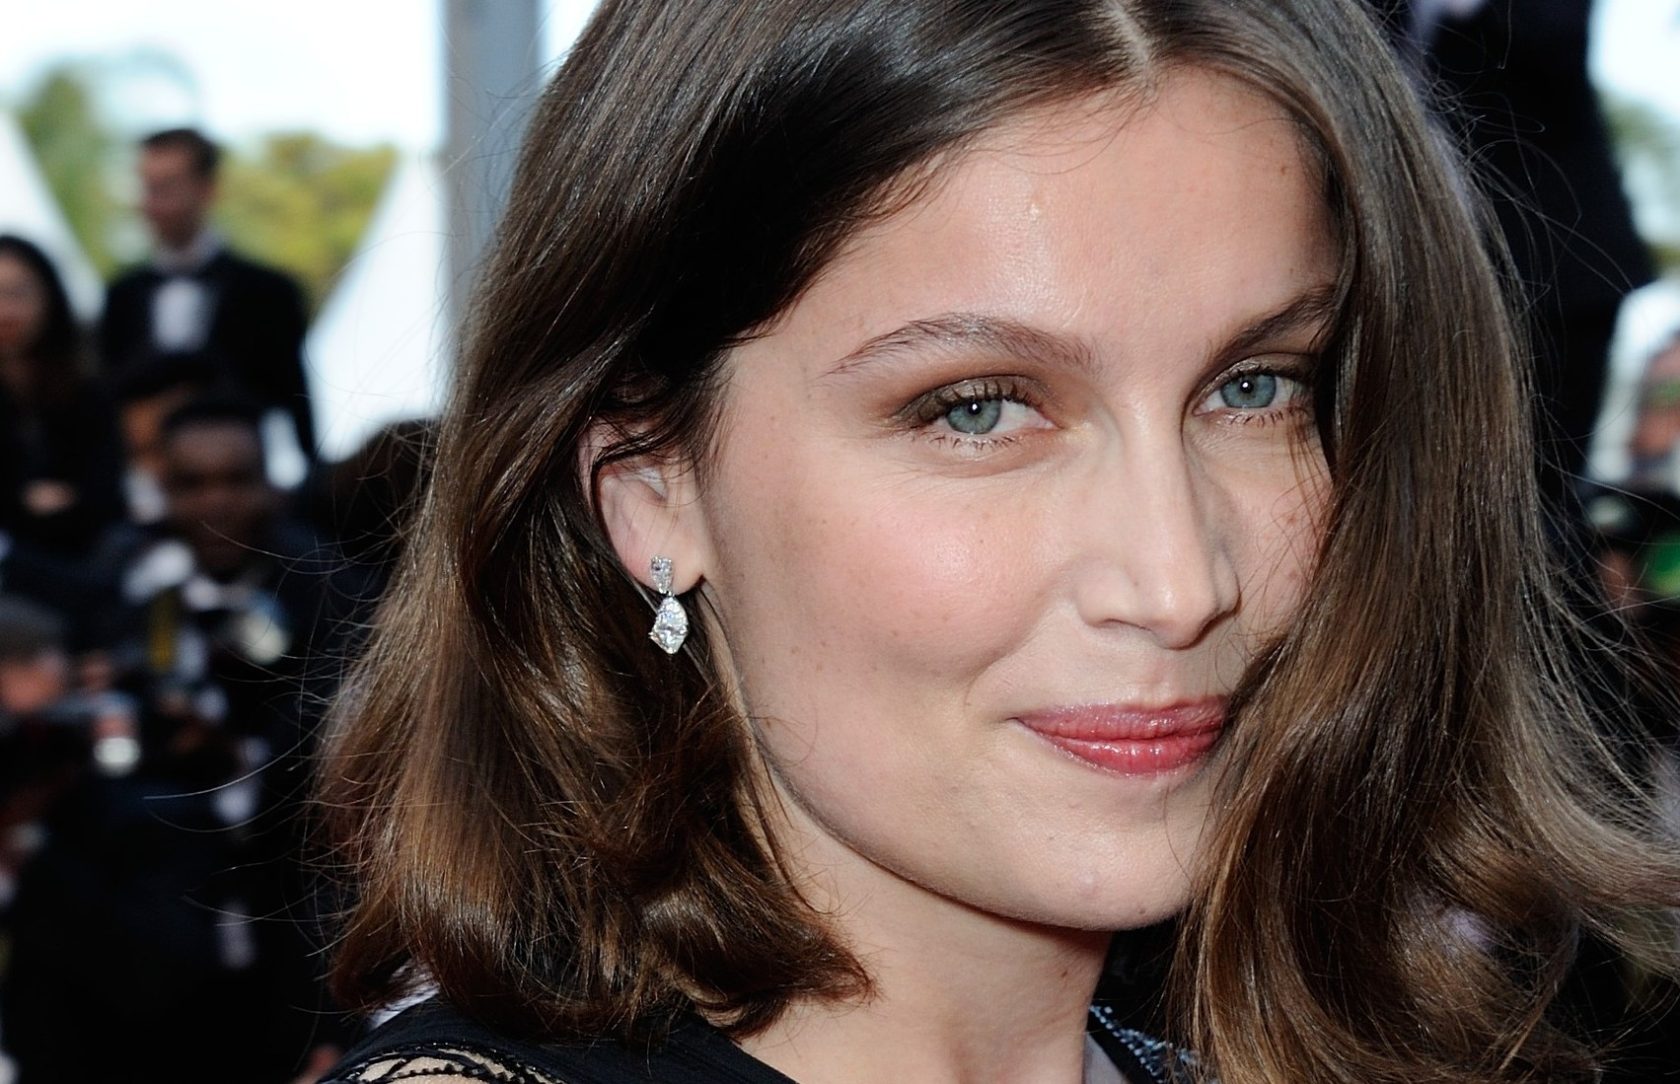 Laetitia Casta attending the 'La Fille Inconnue' screening at the Palais Des Festivals in Cannes, France on May 18, 2016, as part of the 69th Cannes Film Festival., Image: 285738583, License: Rights-managed, Restrictions: , Model Release: no, Credit line: Profimedia, Abaca